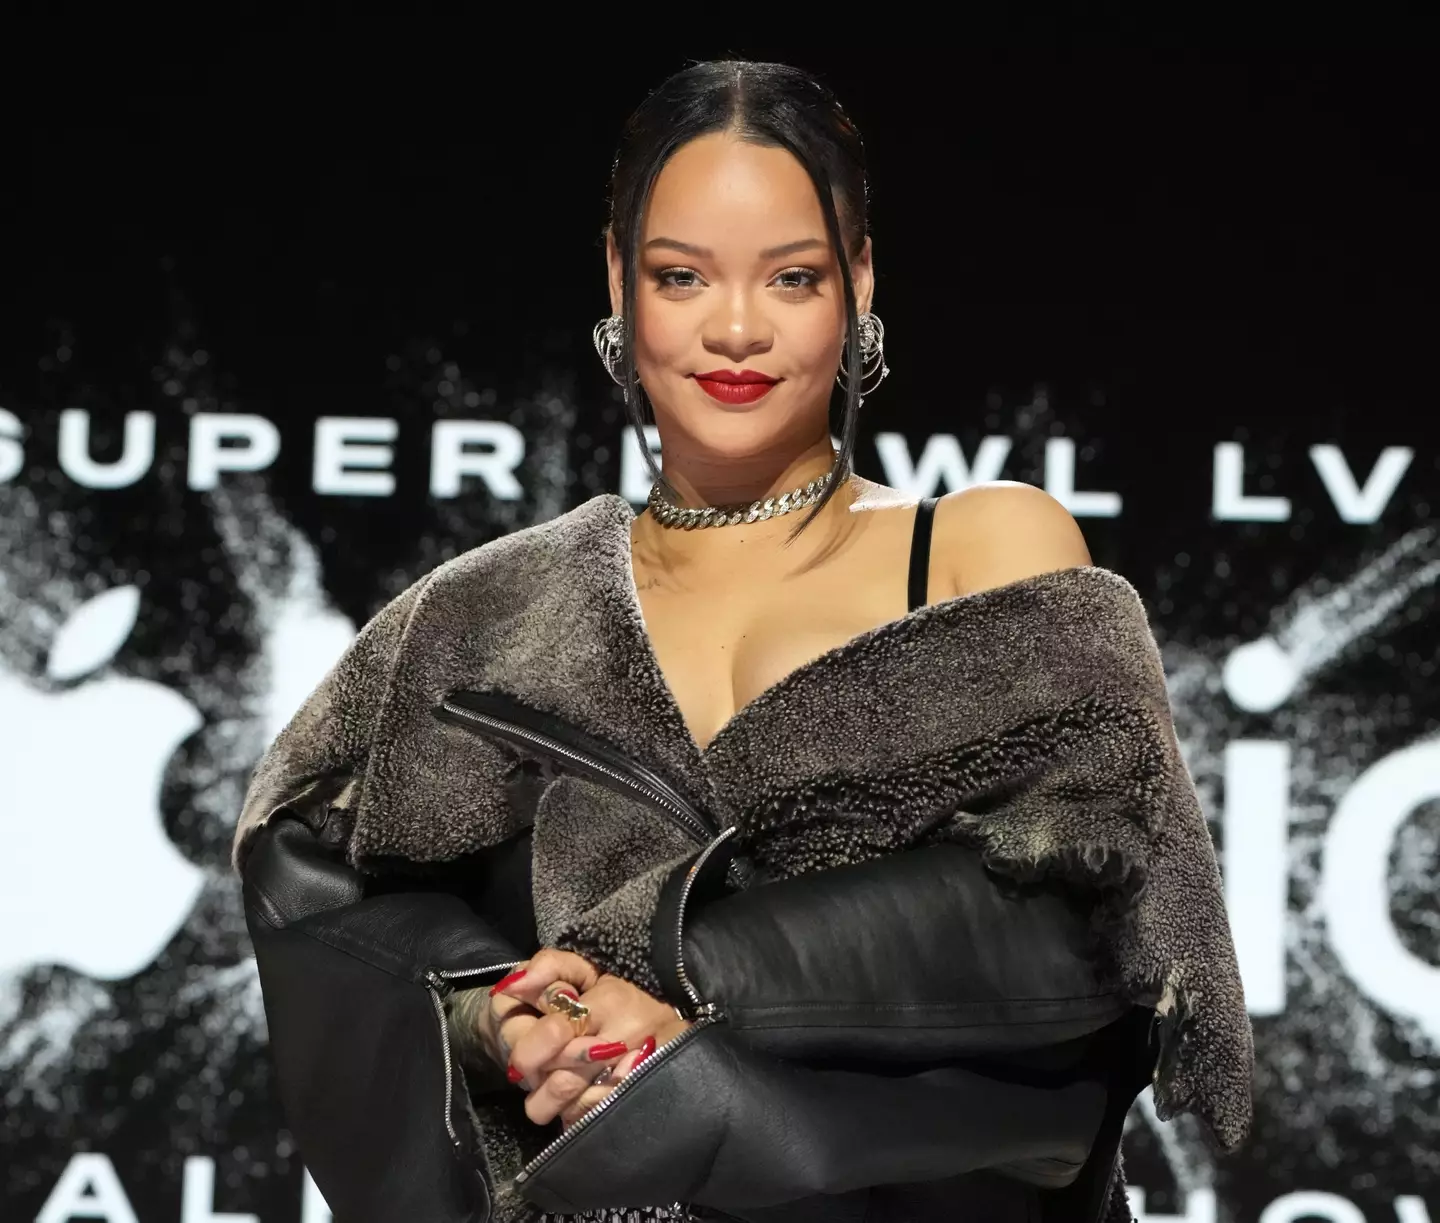 The man was left a little shocked when he found out he was renting his house out to Rihanna. (Kevin Mazur/Getty Images for Roc Nation)